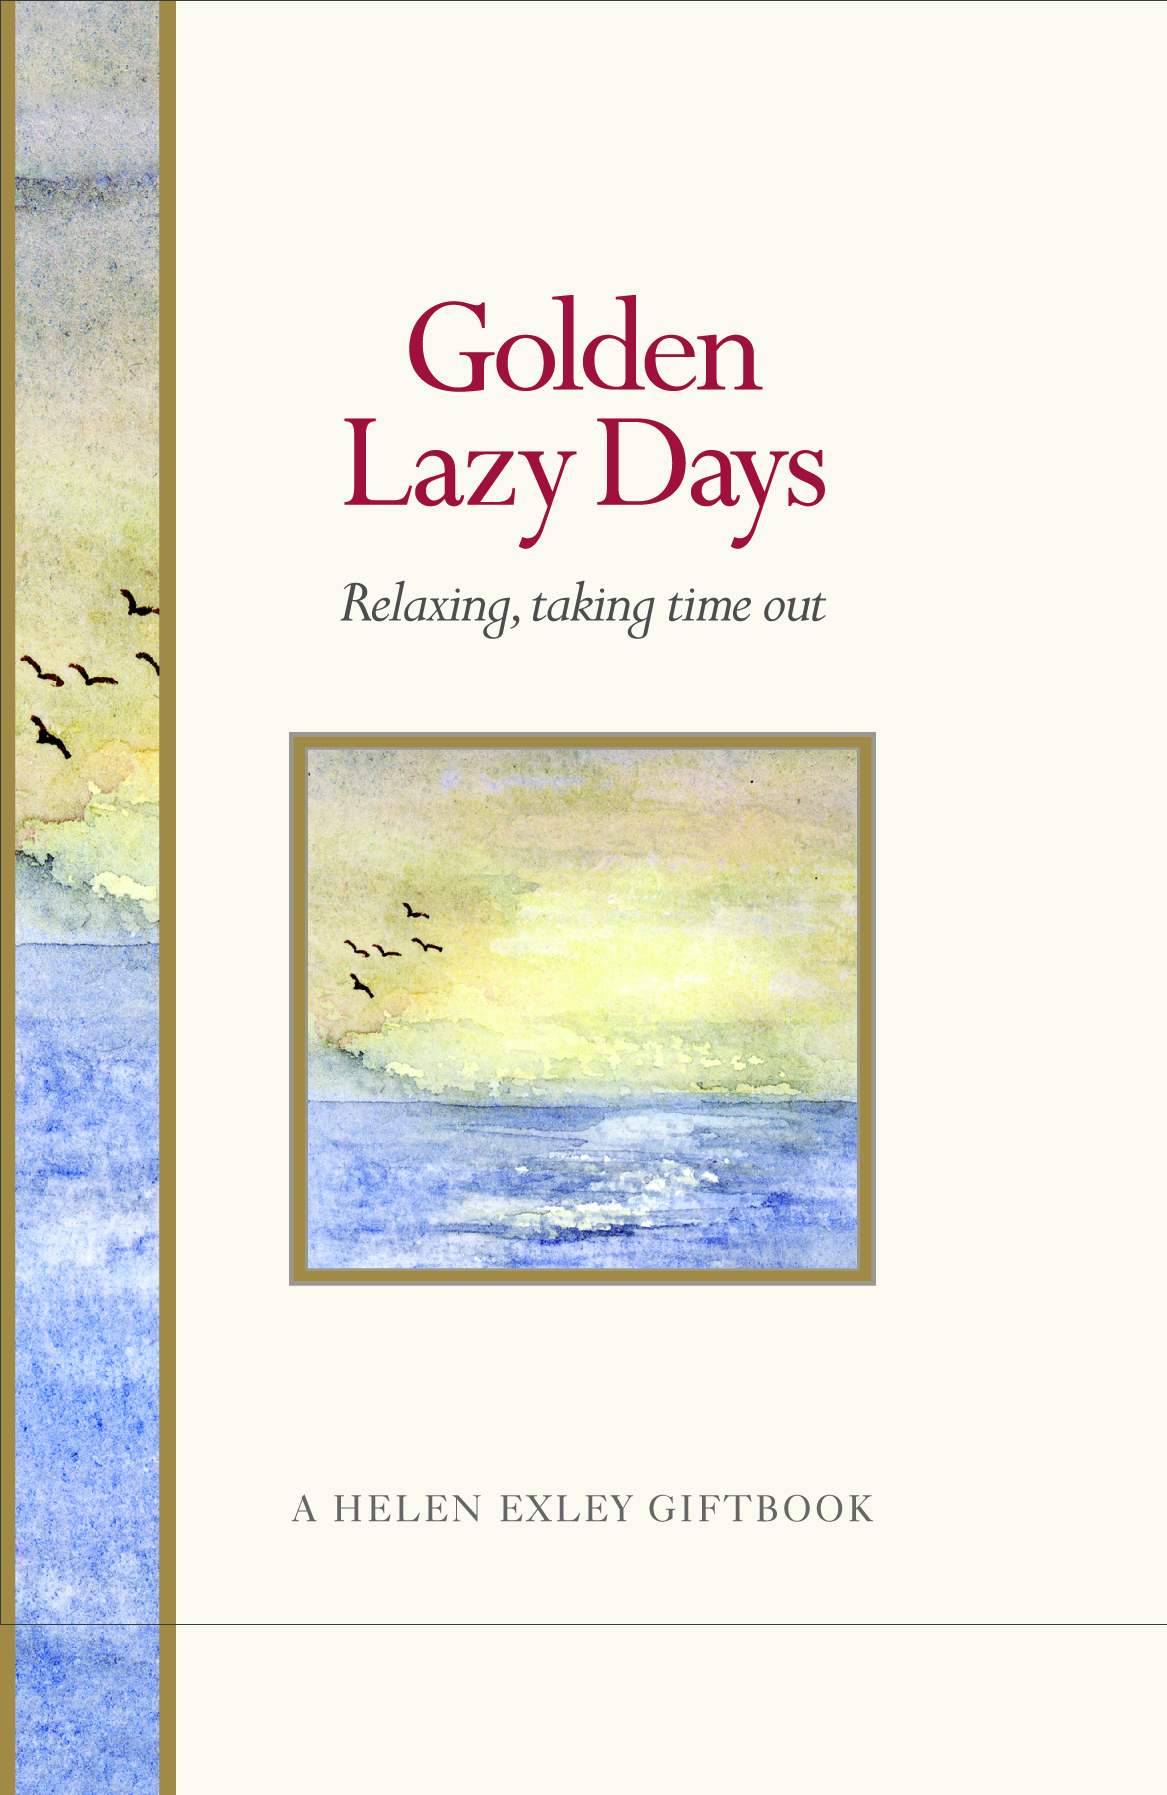 HE GIFTS Golden, Lazy Days